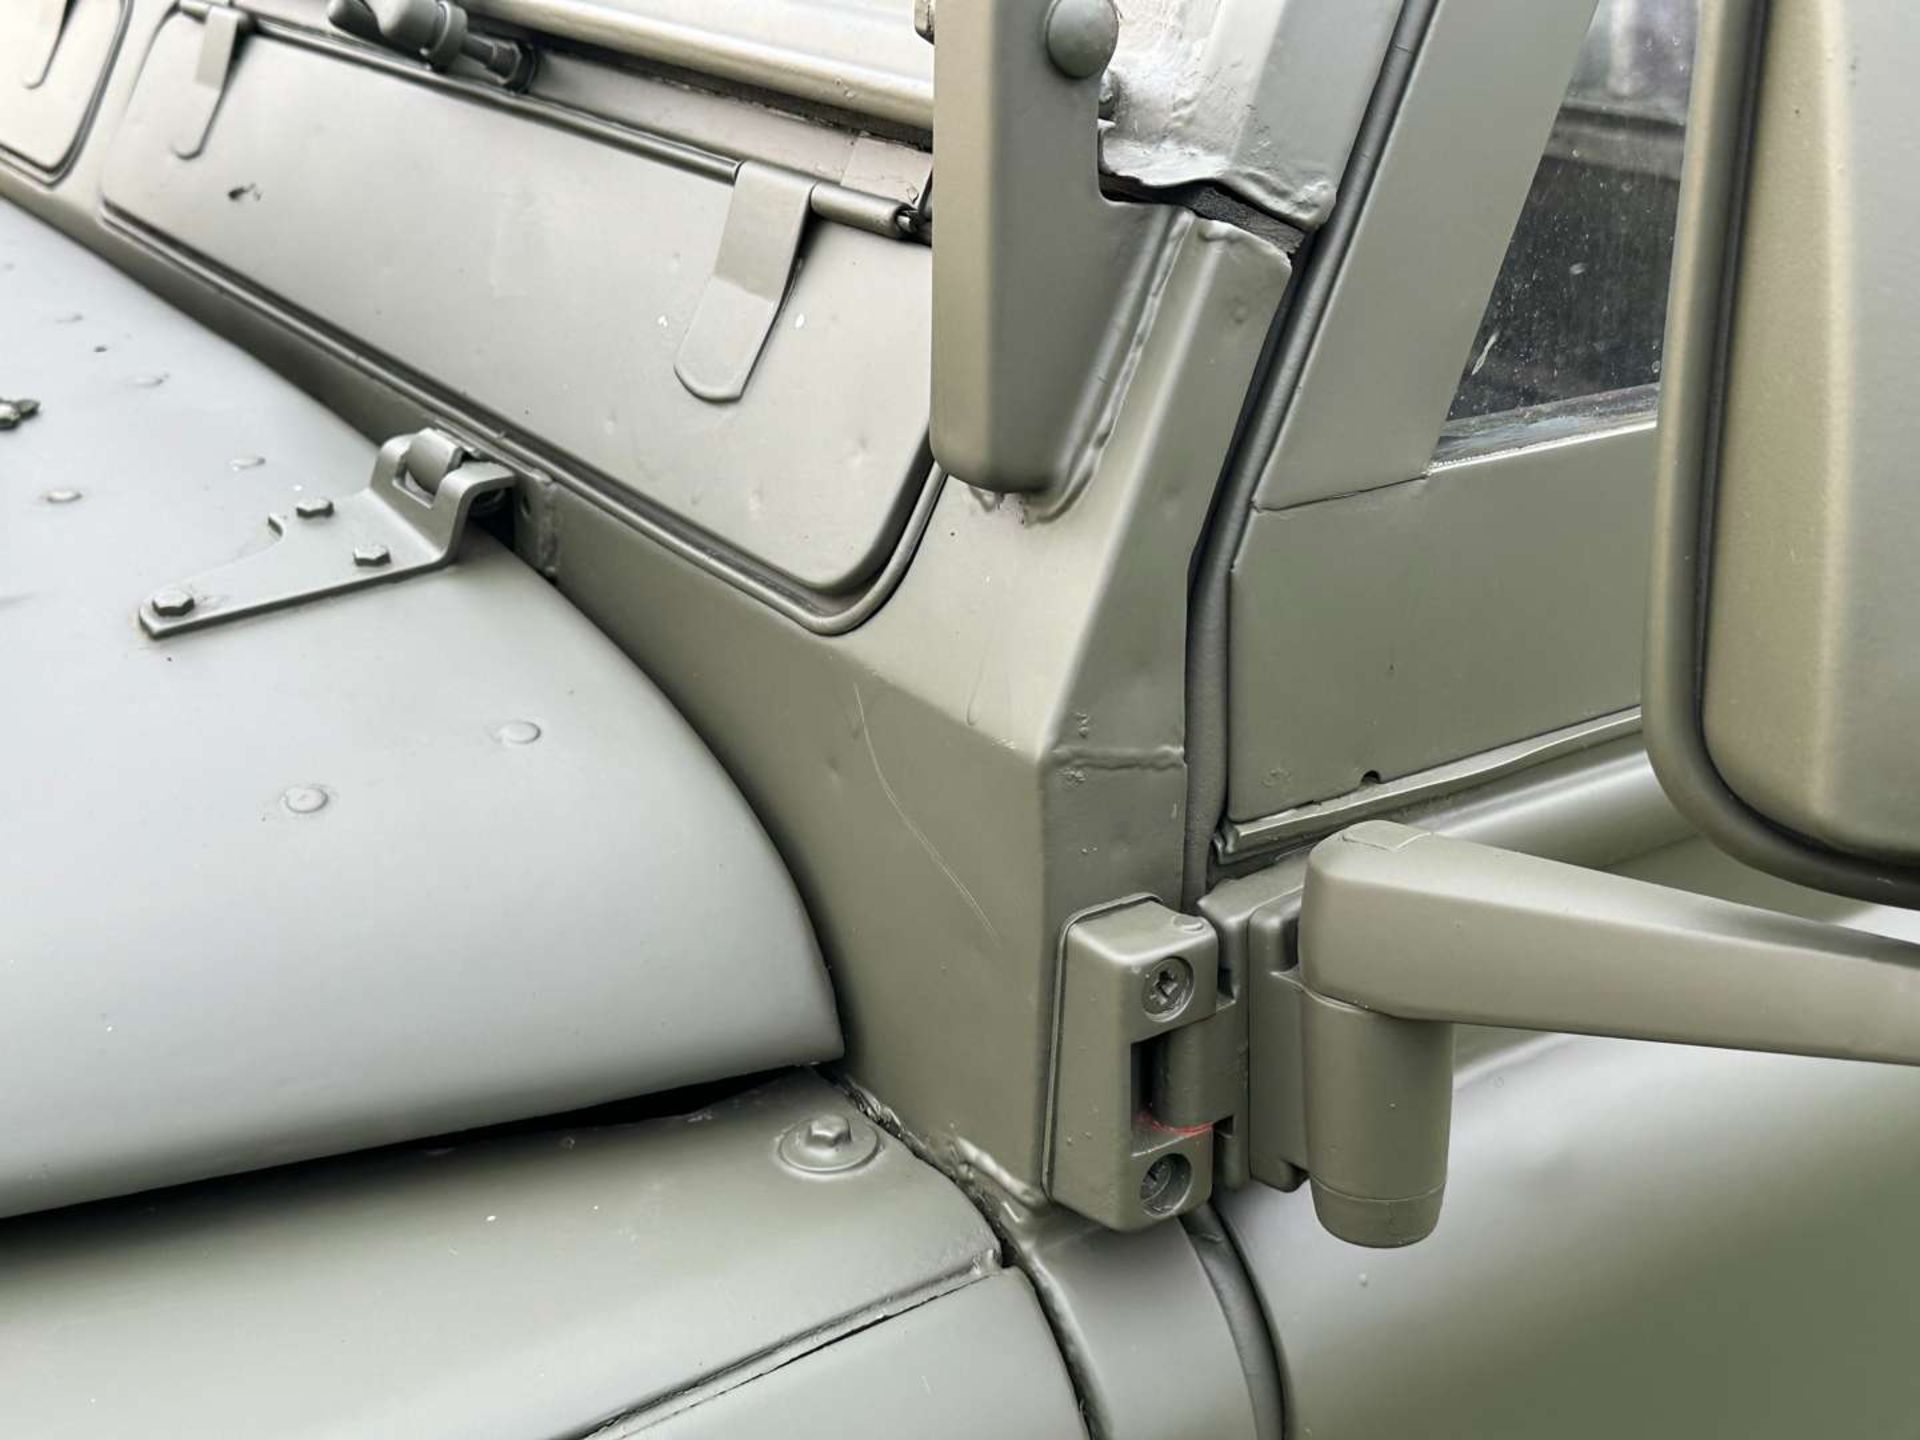 1992 LAND ROVER SERIES III PICK-UP - Image 14 of 25